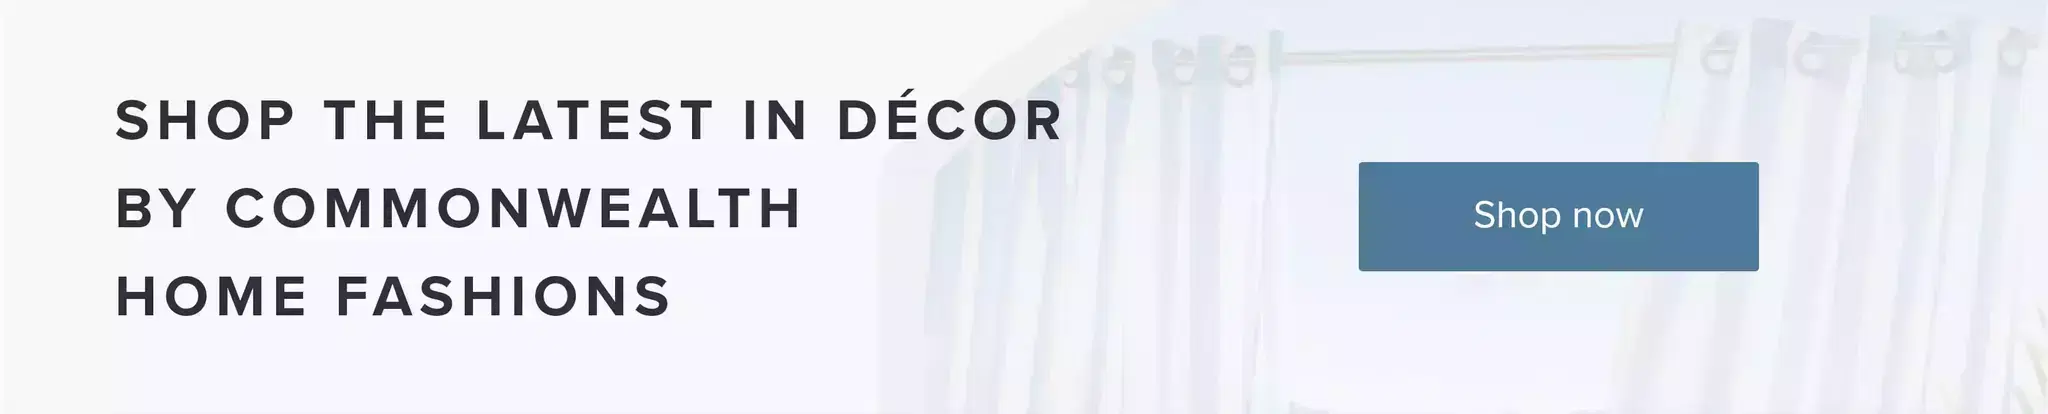 SHOP THE LATEST IN DÉCOR BY COMMONWEALTH HOME FASHIONS